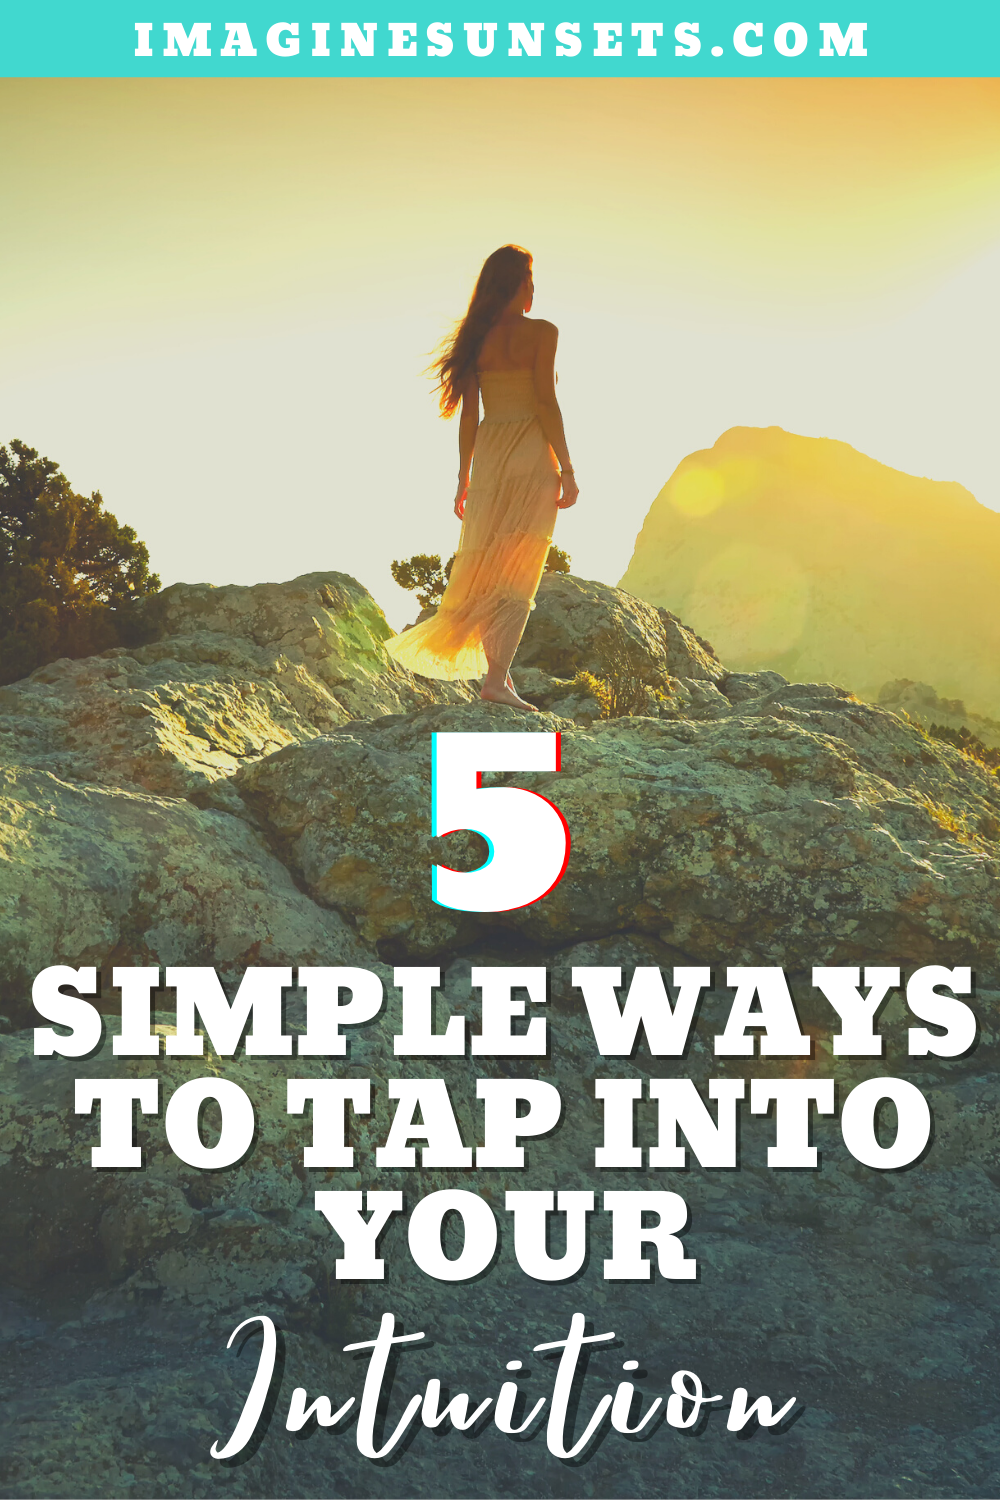 5 simple ways to tap into your intuition